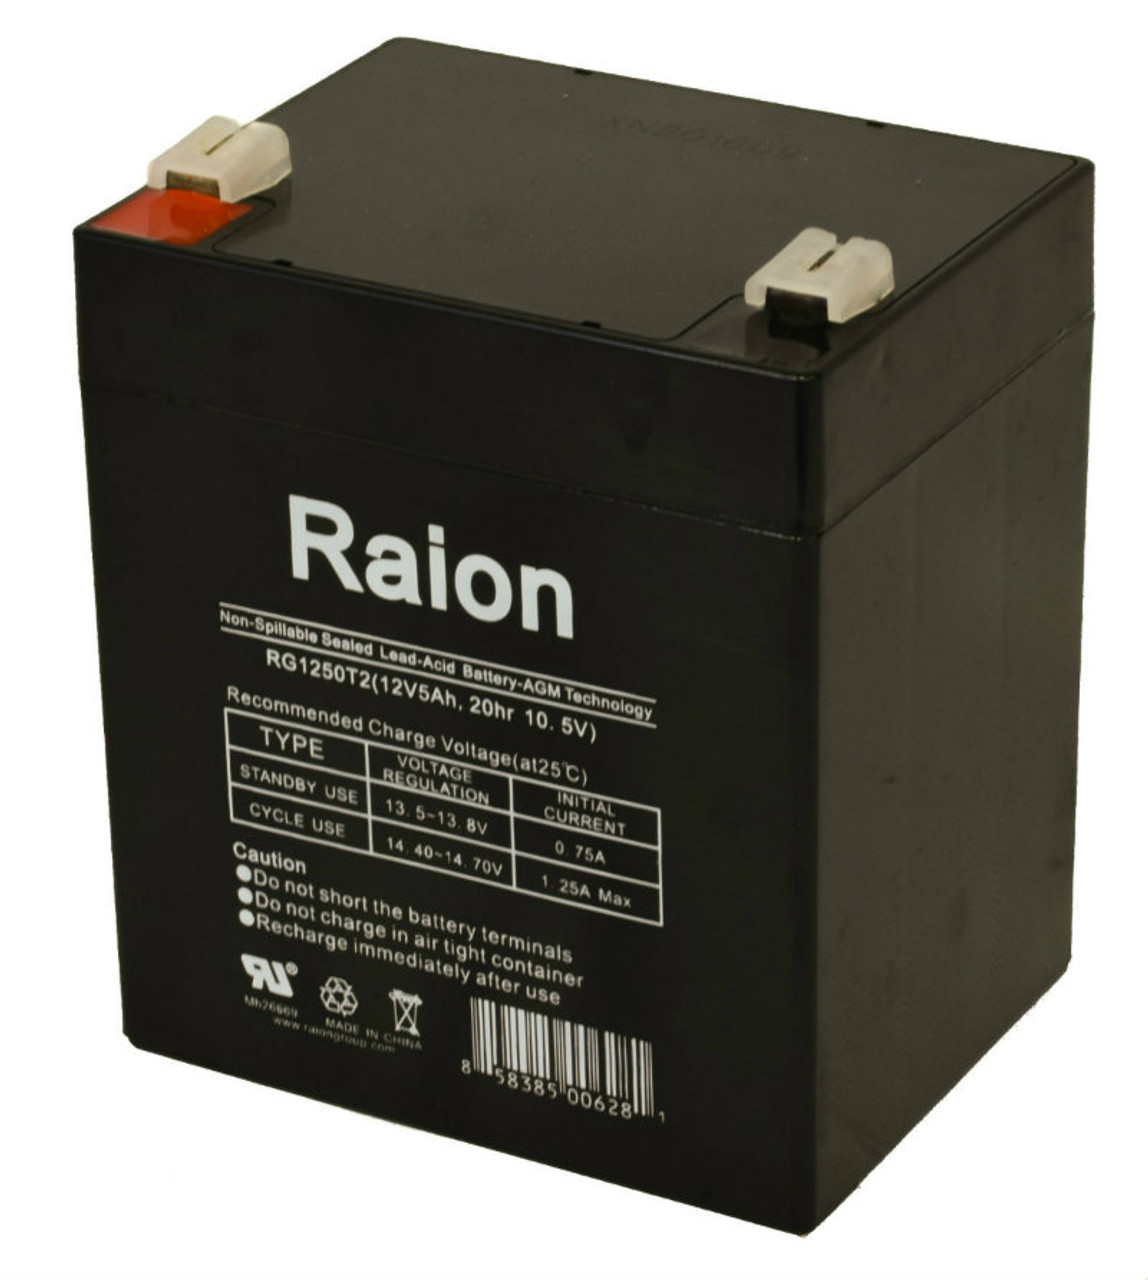 Raion Power RG1250T1 Replacement Alarm Security System Battery for ACME Security System 602